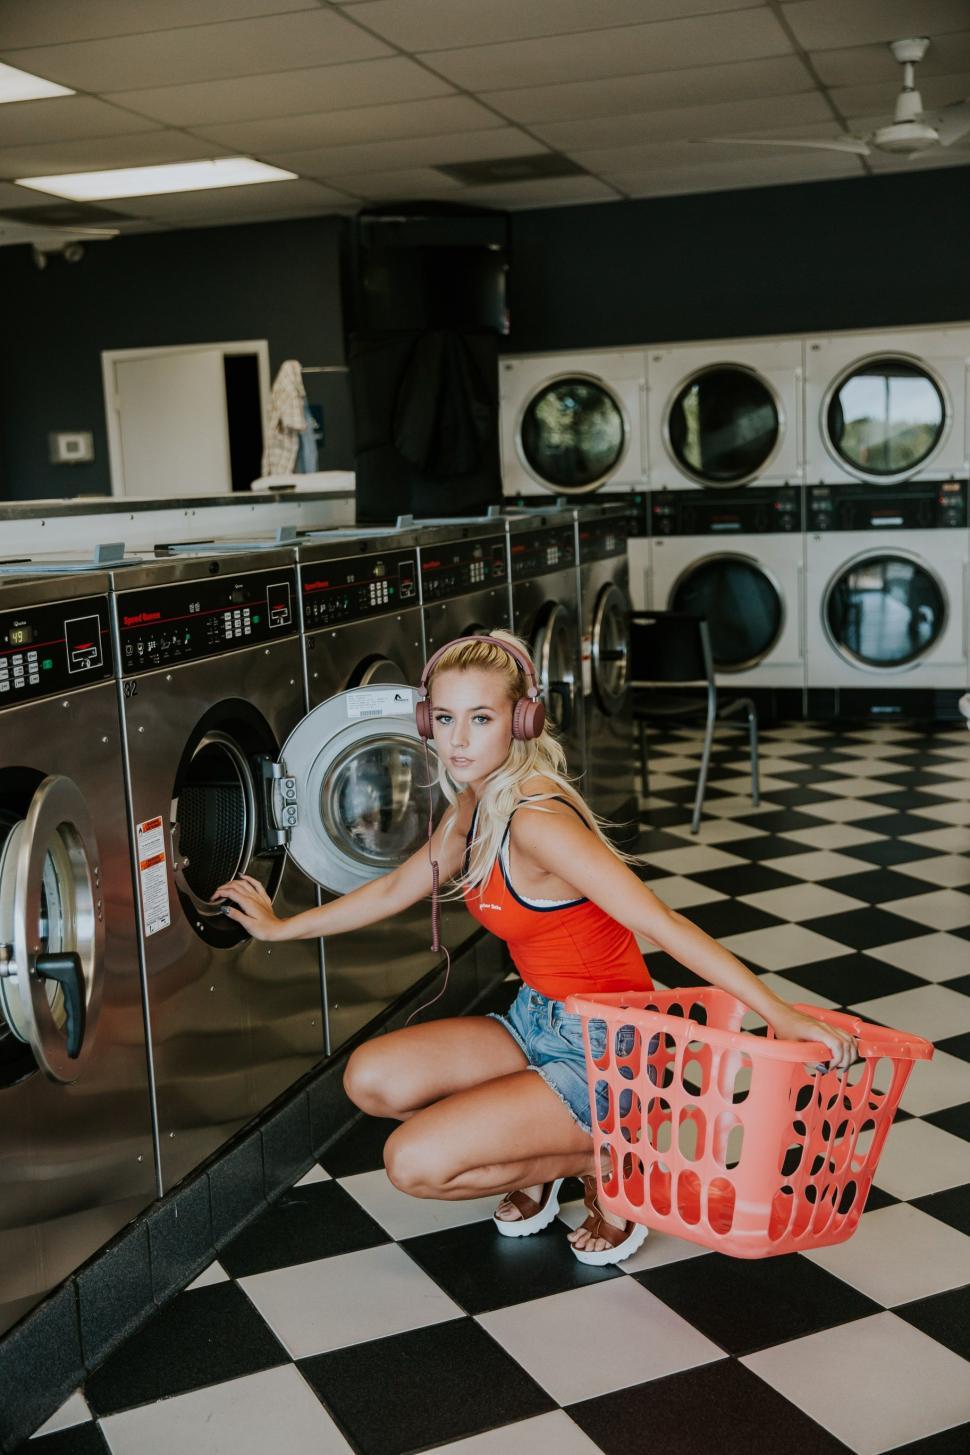 Free Image of Urban Woman with headphones at laundromat 